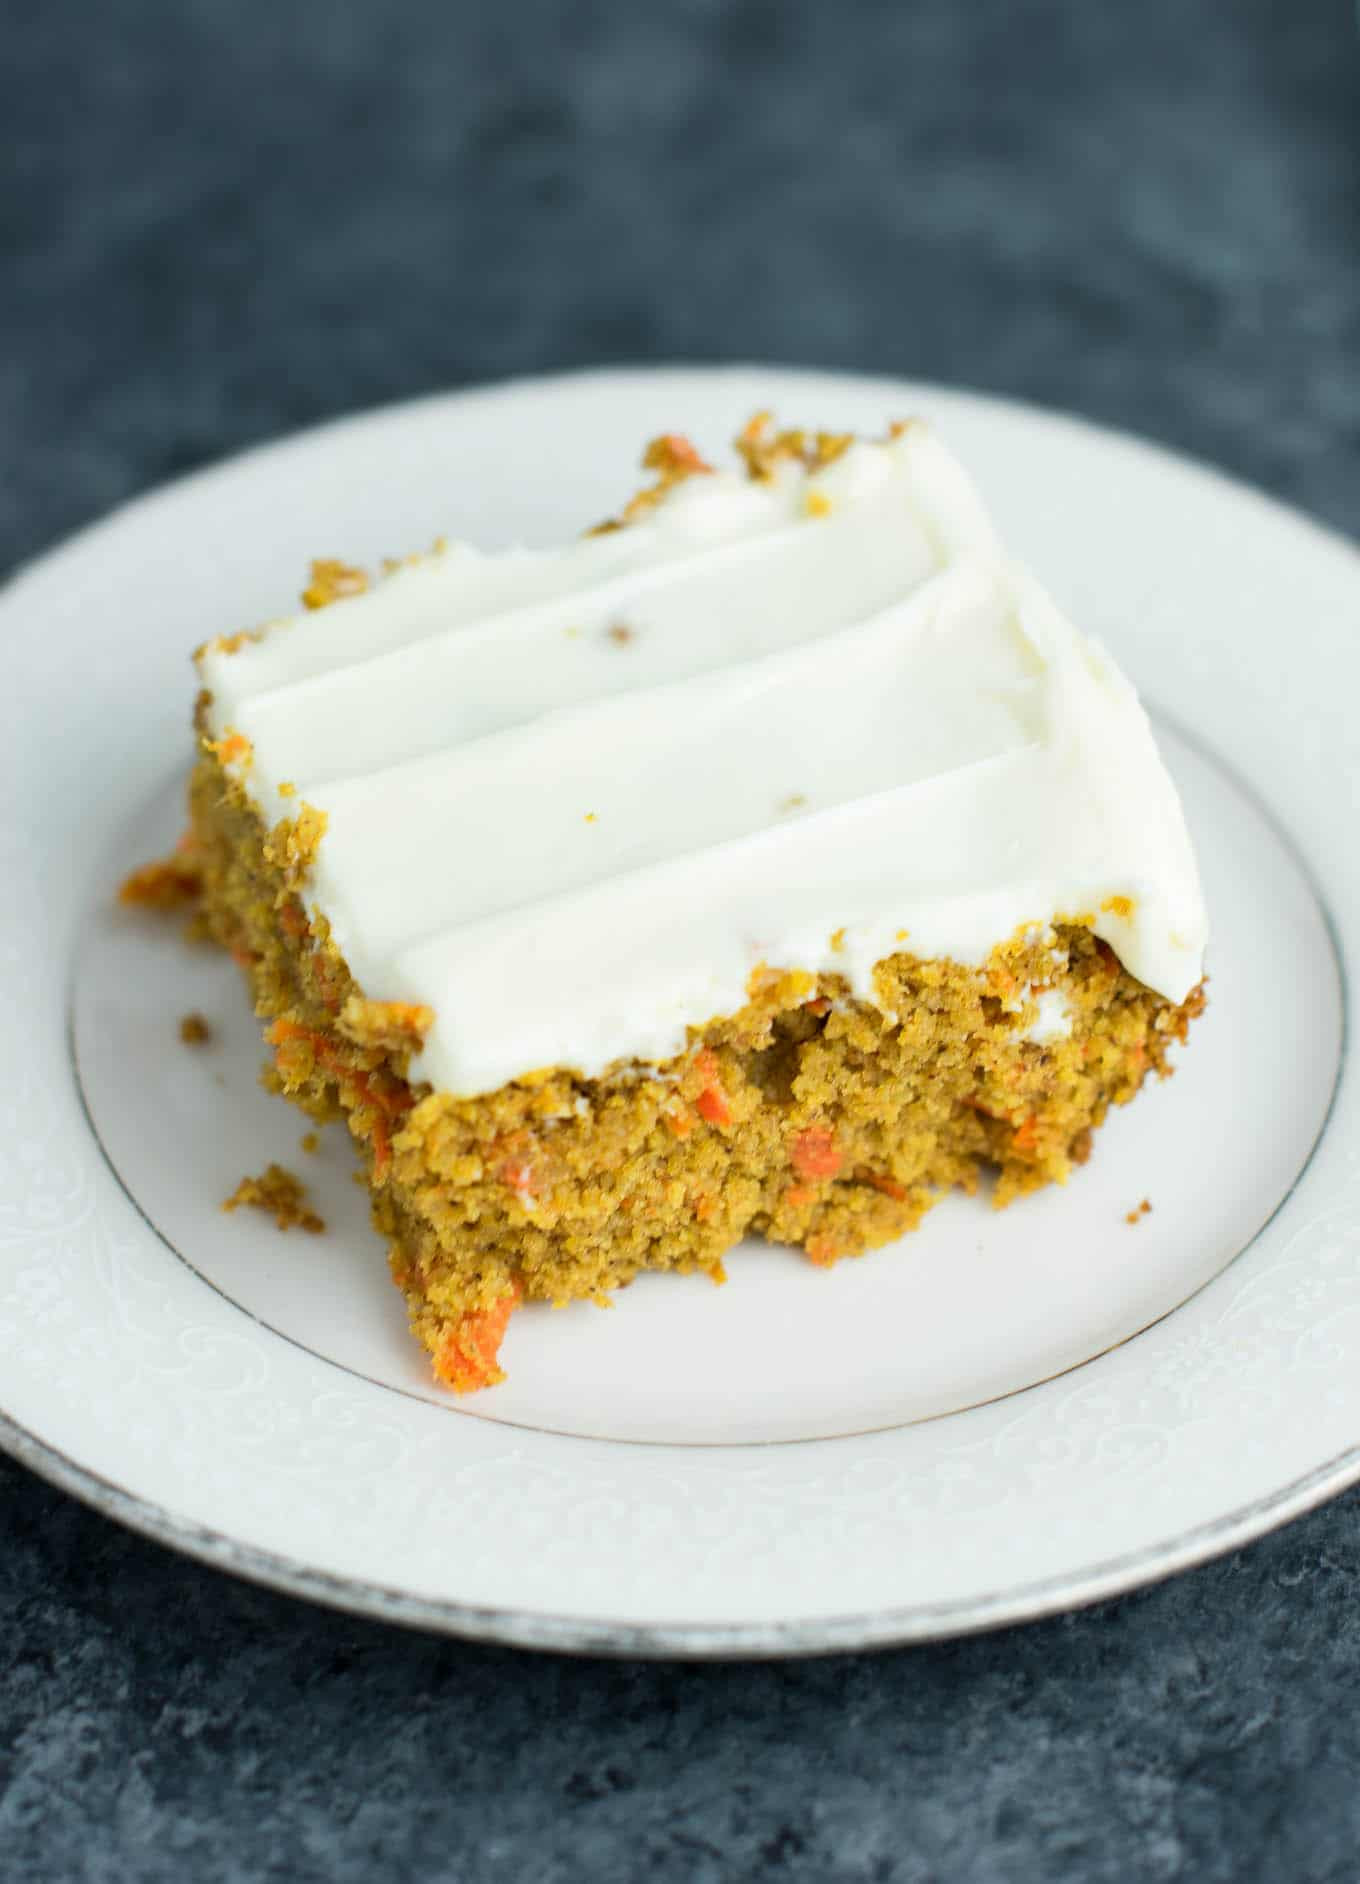 Best Gluten Free Carrot Cake
 Gluten Free Carrot Cake Recipe with cream cheese frosting